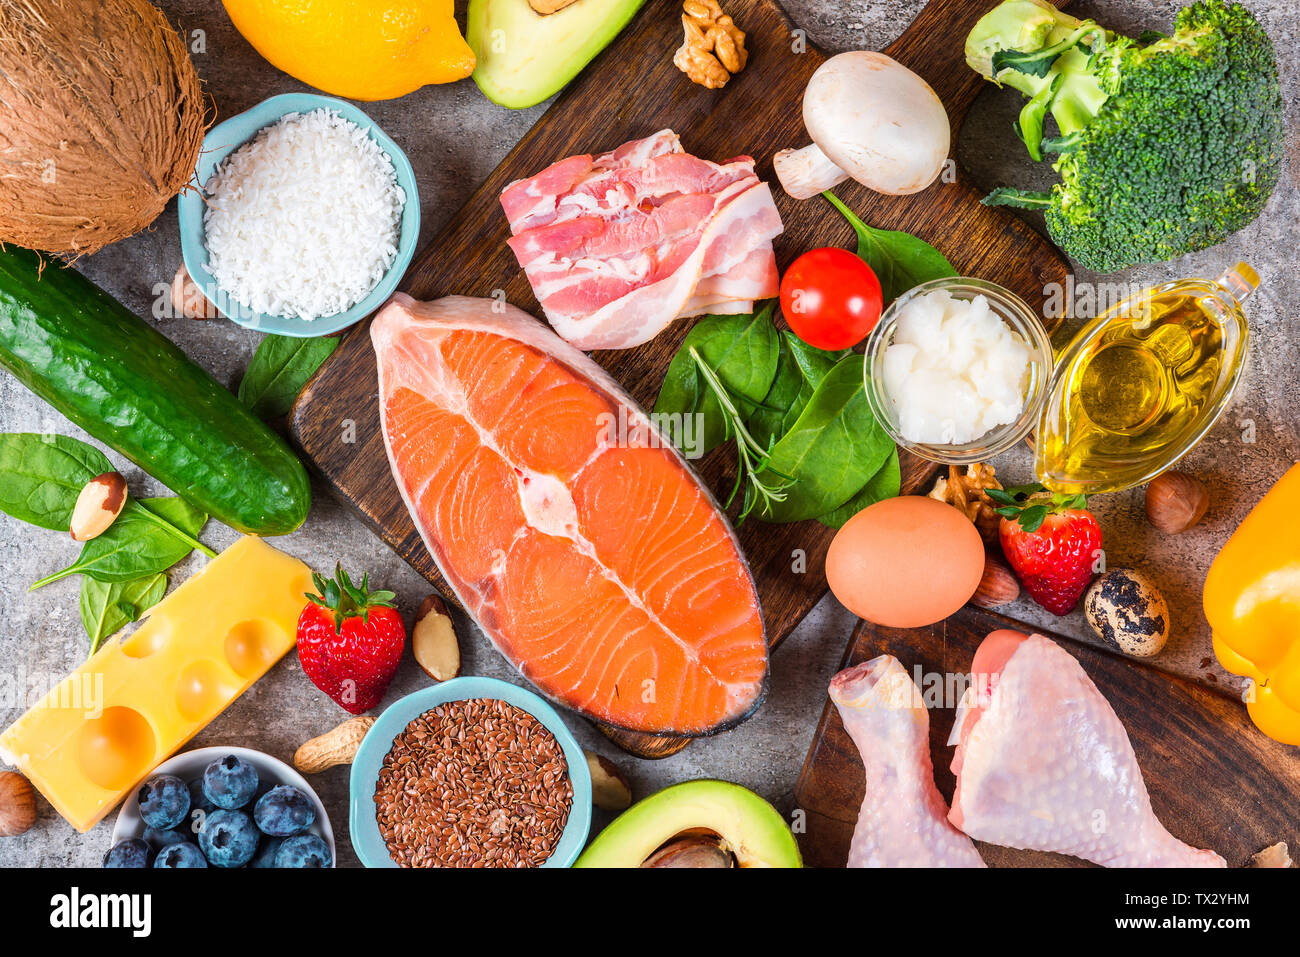 Healthy low carbs products. Ketogenic keto diet concept. Top view Stock Photo